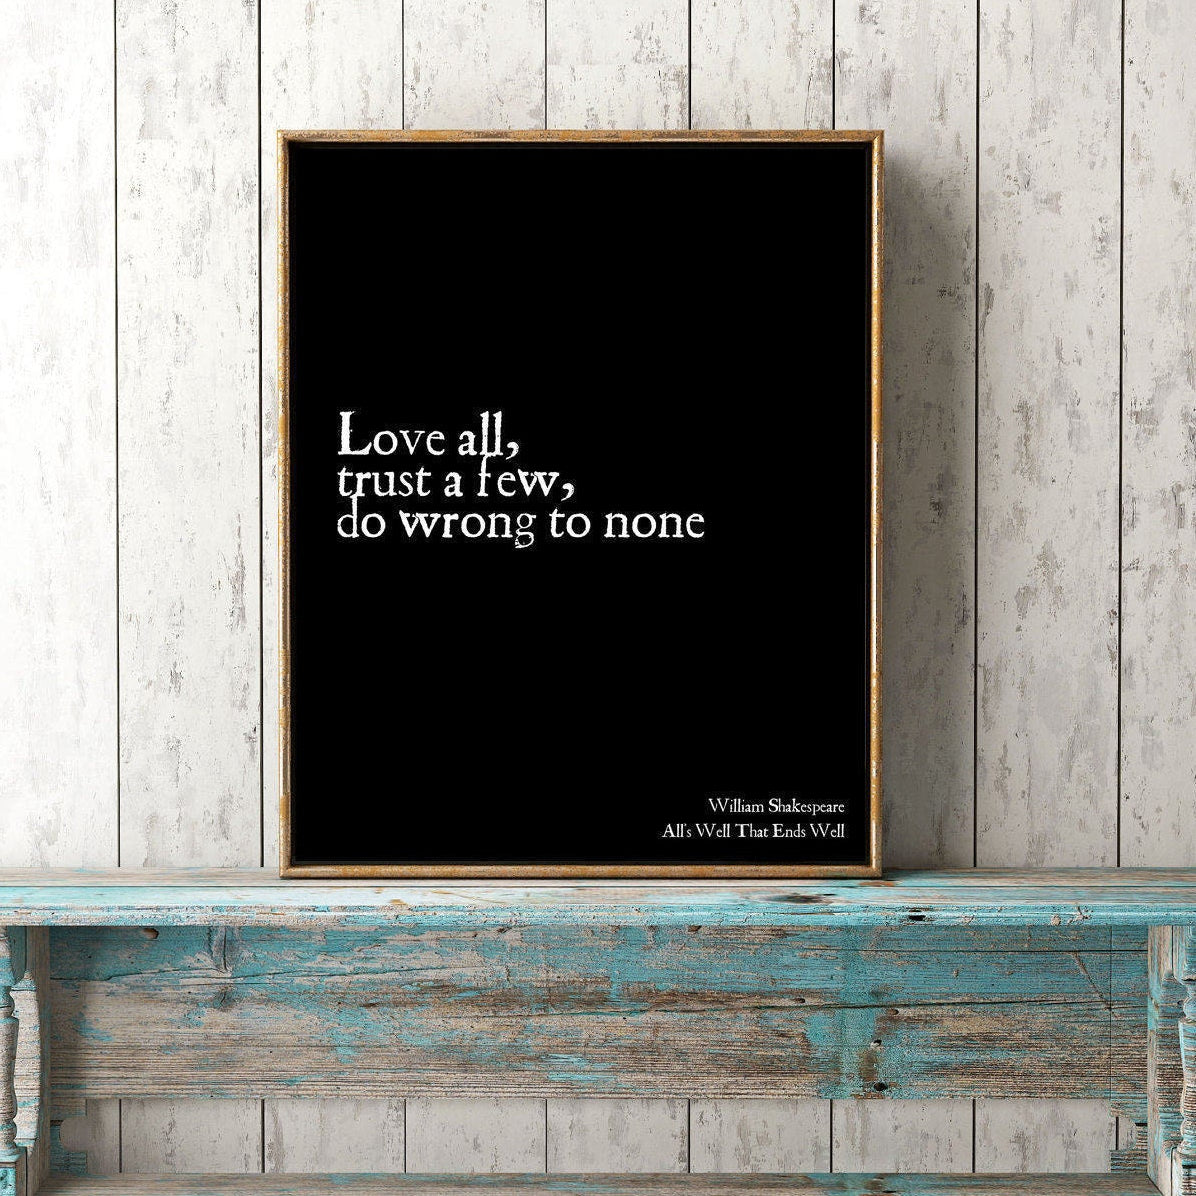 William Shakespeare - Love All Trust A Few Do Wrong To None Shakespeare Quote Print, All's Well That Ends Well Wall Art